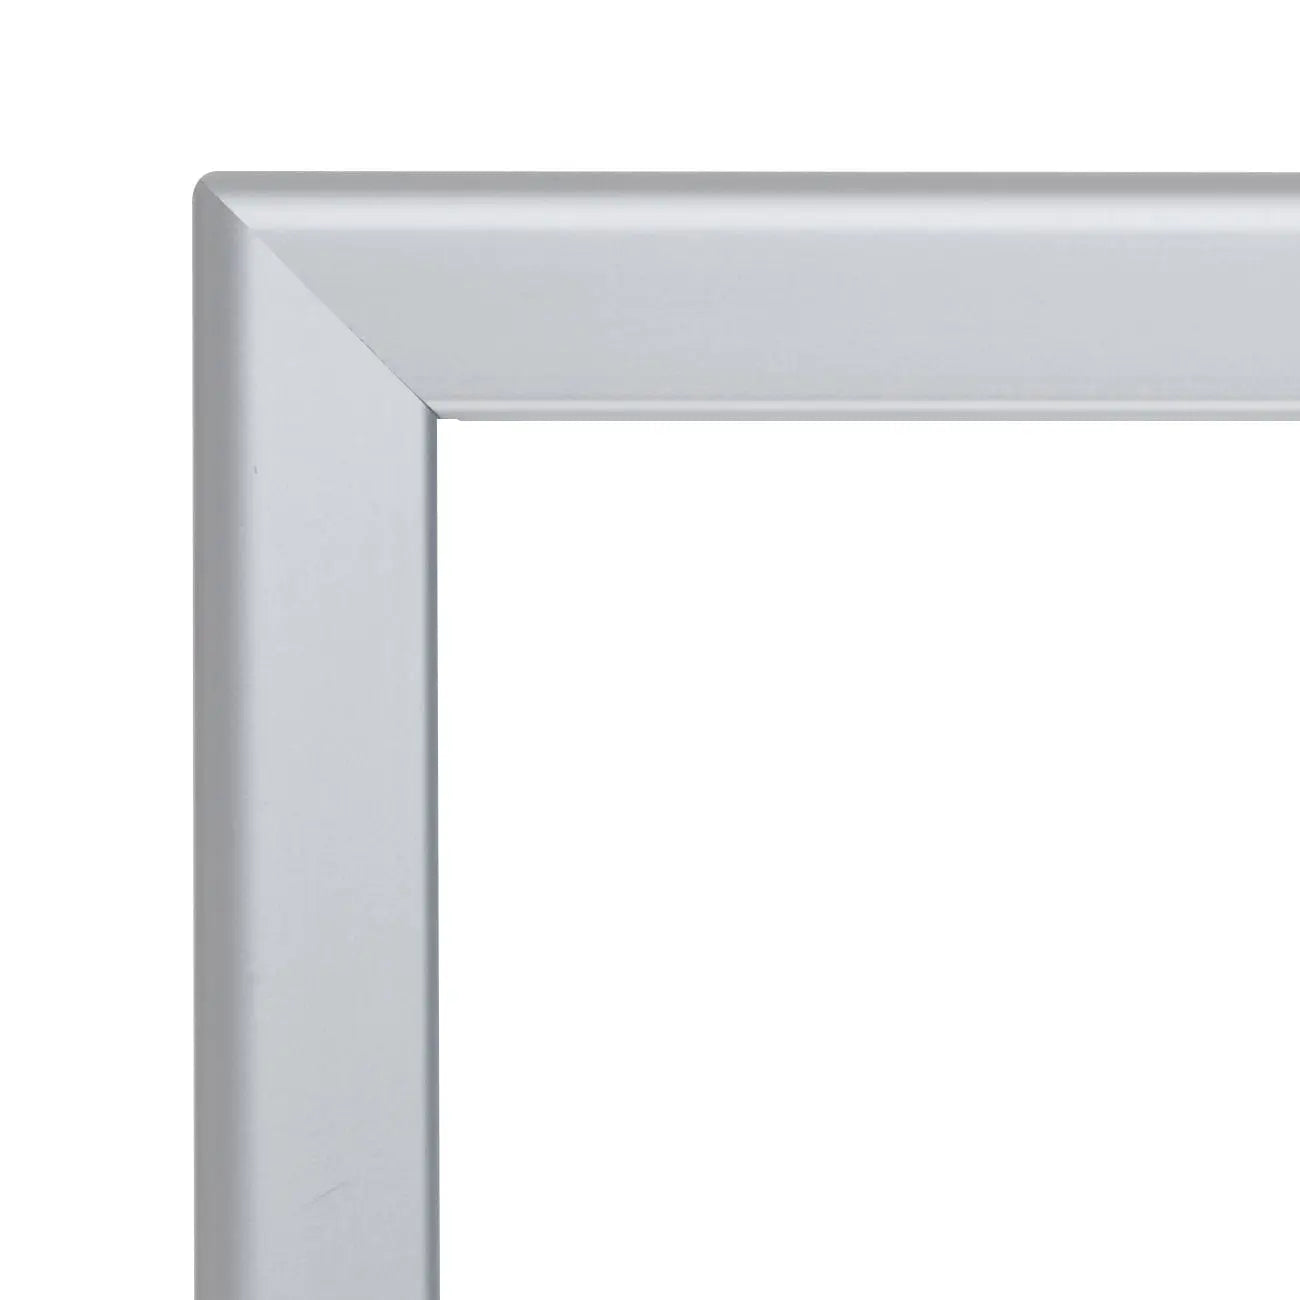 8.5x11 Inches Silver Snap Frame - 1.25" Profile - Snap Frames Direct